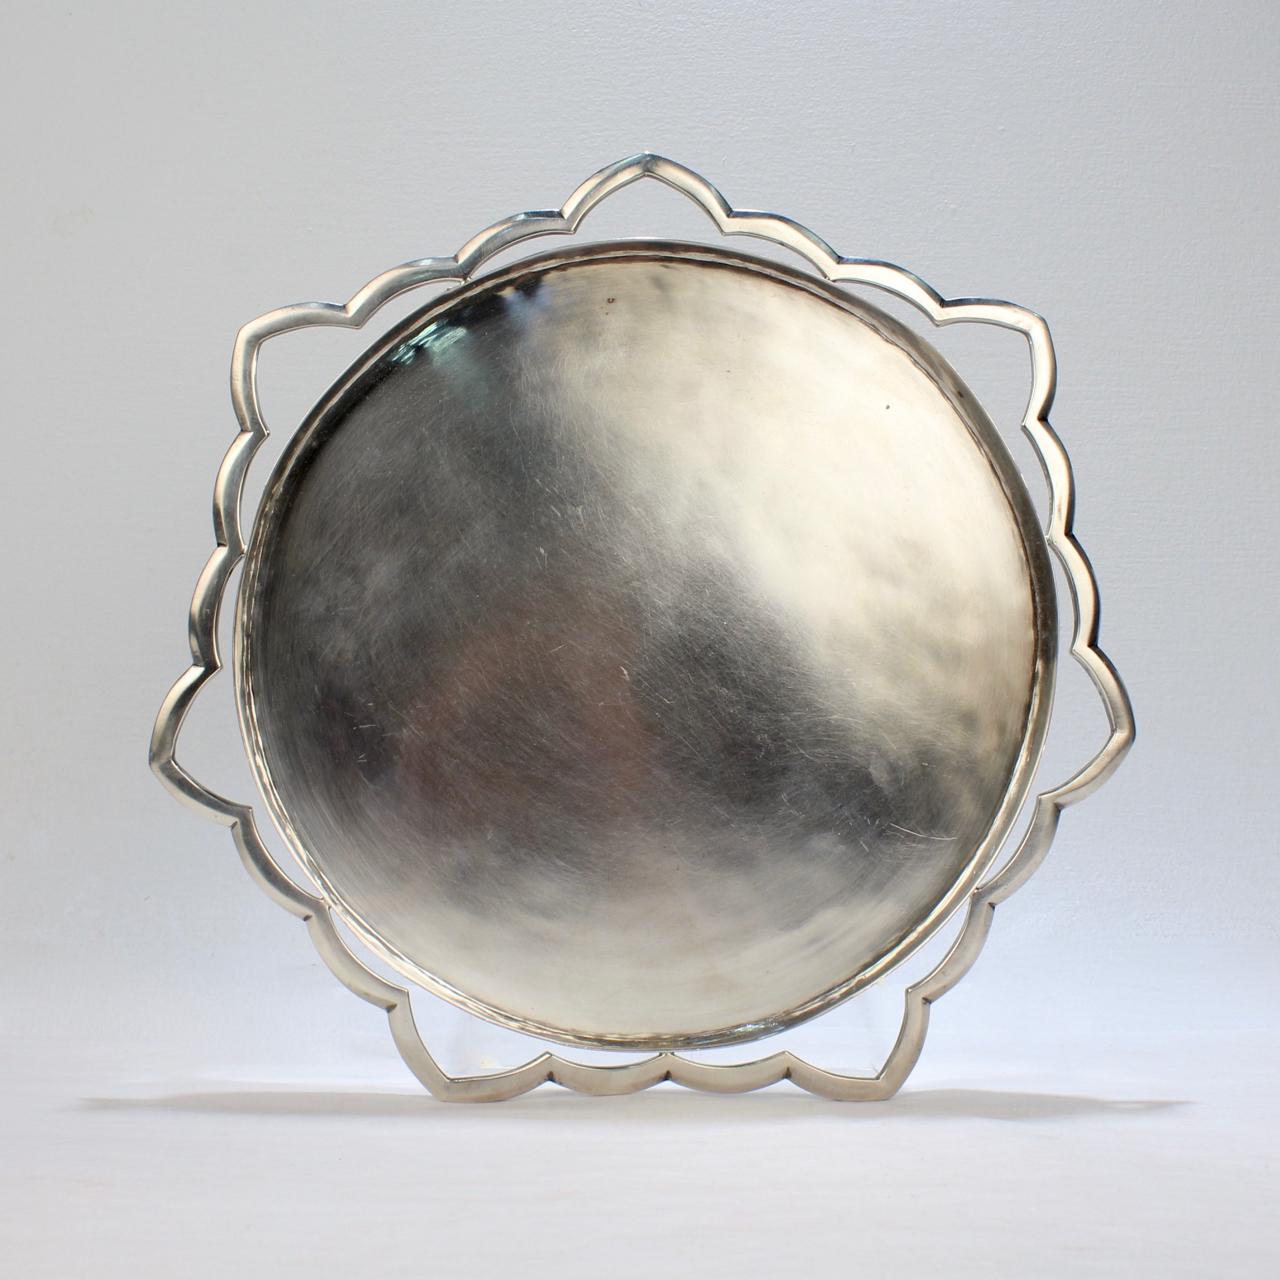 A fantastic Modernist sterling silver tray by Henry Petzal.

Around the circumference of the round, shallow tray is an openwork starburst border.   

Harry Petzal was an important German born, Modernist American silversmith, whose work was widely